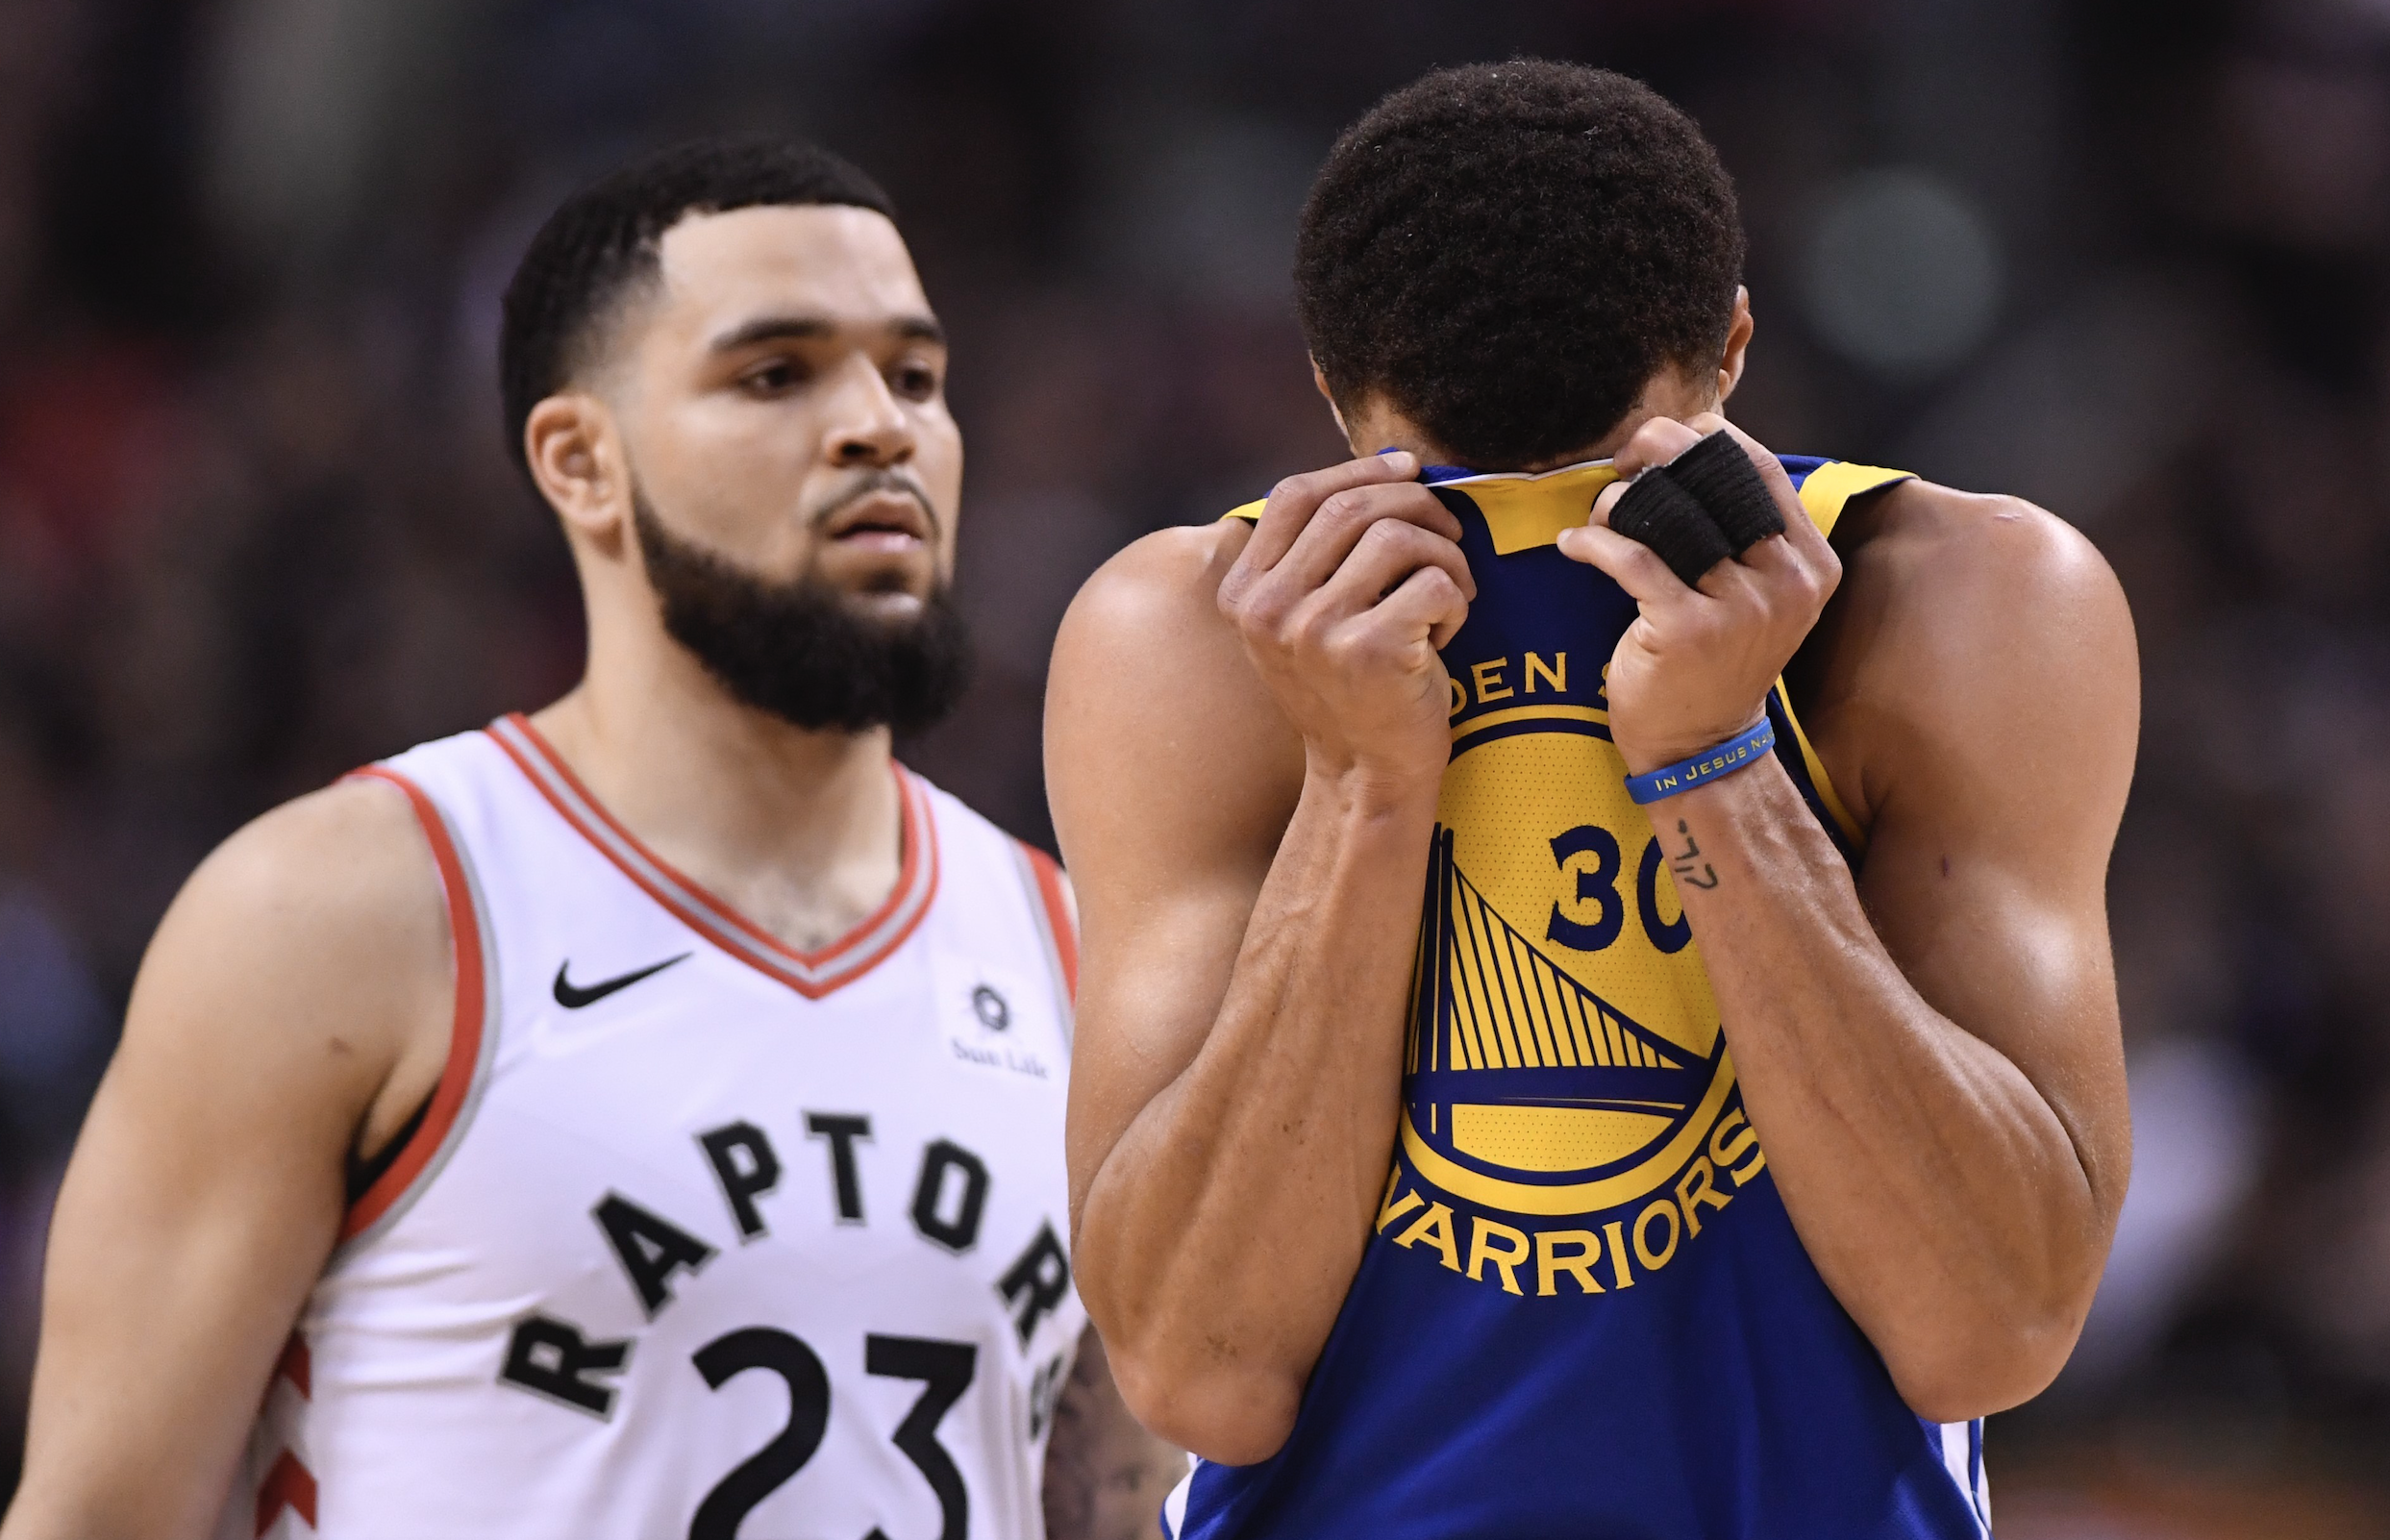 Golden-State-Warriors-guard-Stephen-Curry-(30)-reacts-during-second-half-basketball-action-in-Game-1-of-the-NBA-Finals-against-the-Toronto-Raptors-in-Toronto-on-Thursday,-May-30,-2019.-(Frank-Gunn/CP)